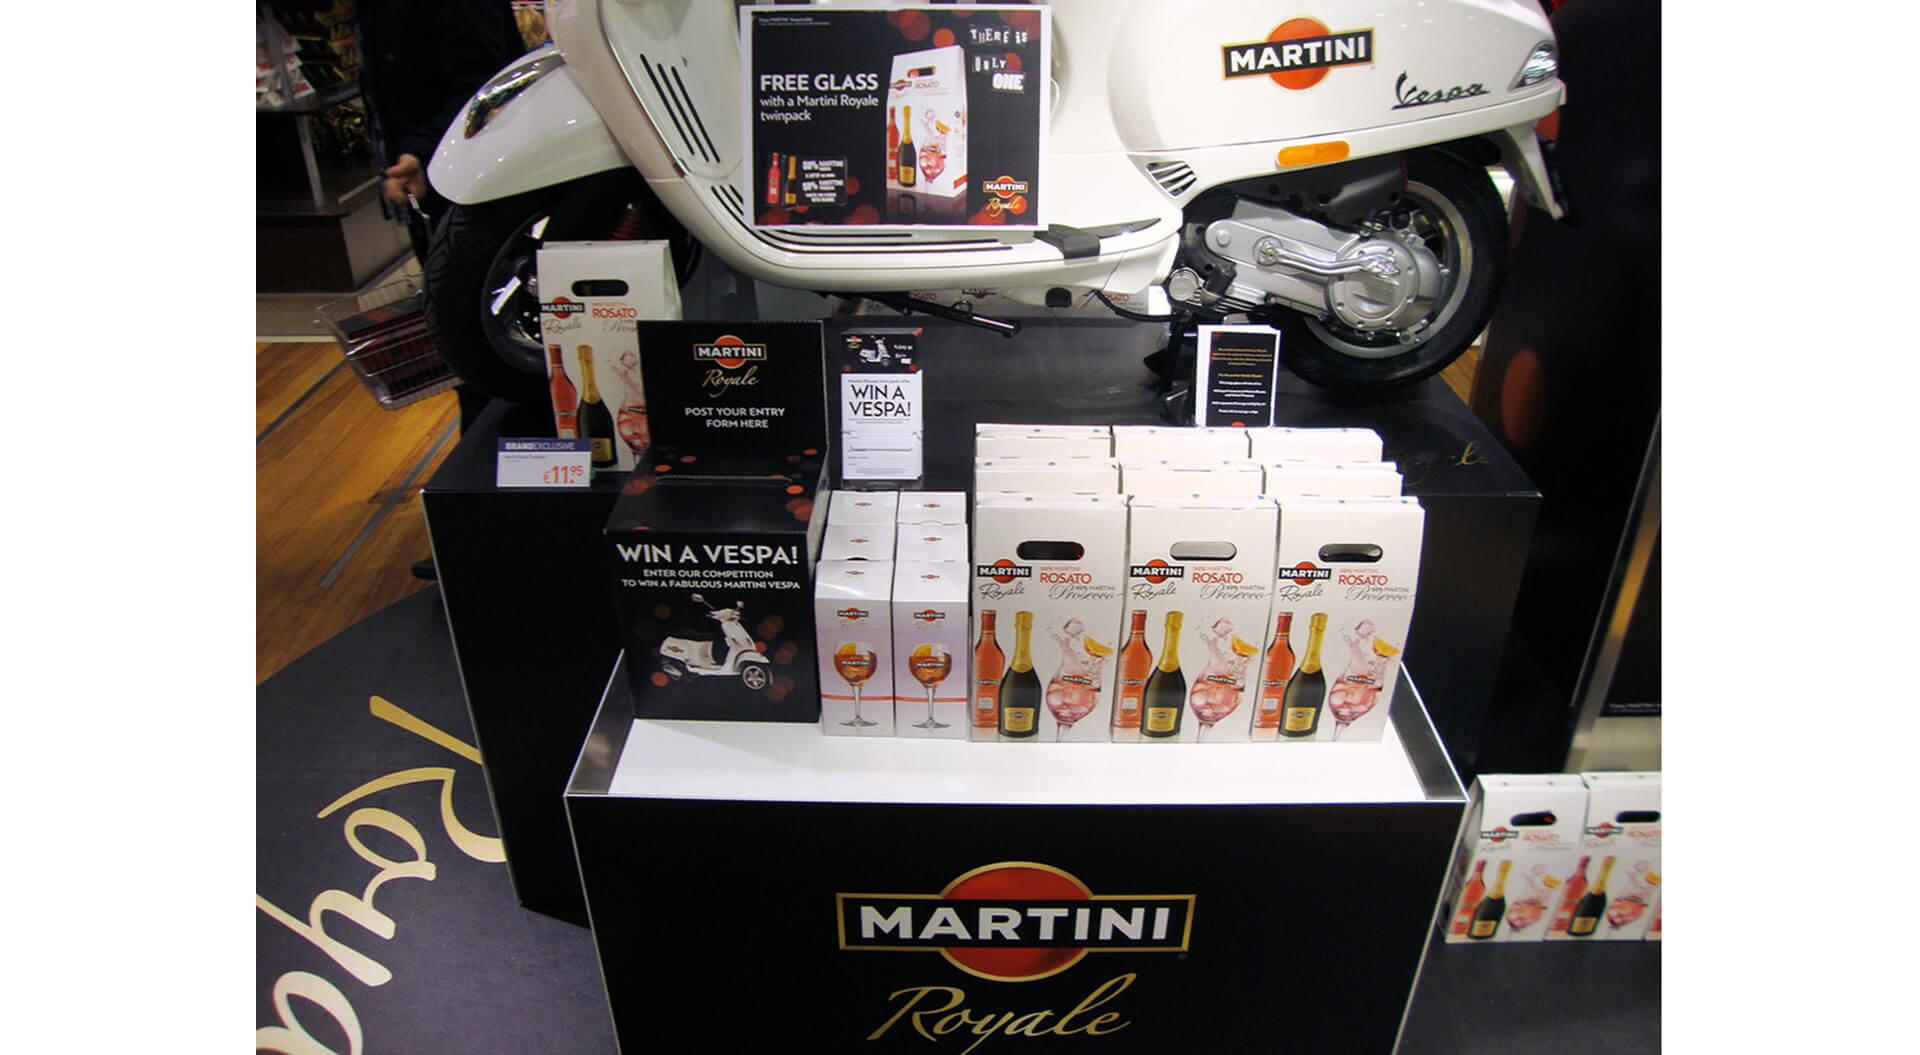  Martini Royale  win a Vespa travel retail, merchandising display in airports for Bacardi Global Travel Retail